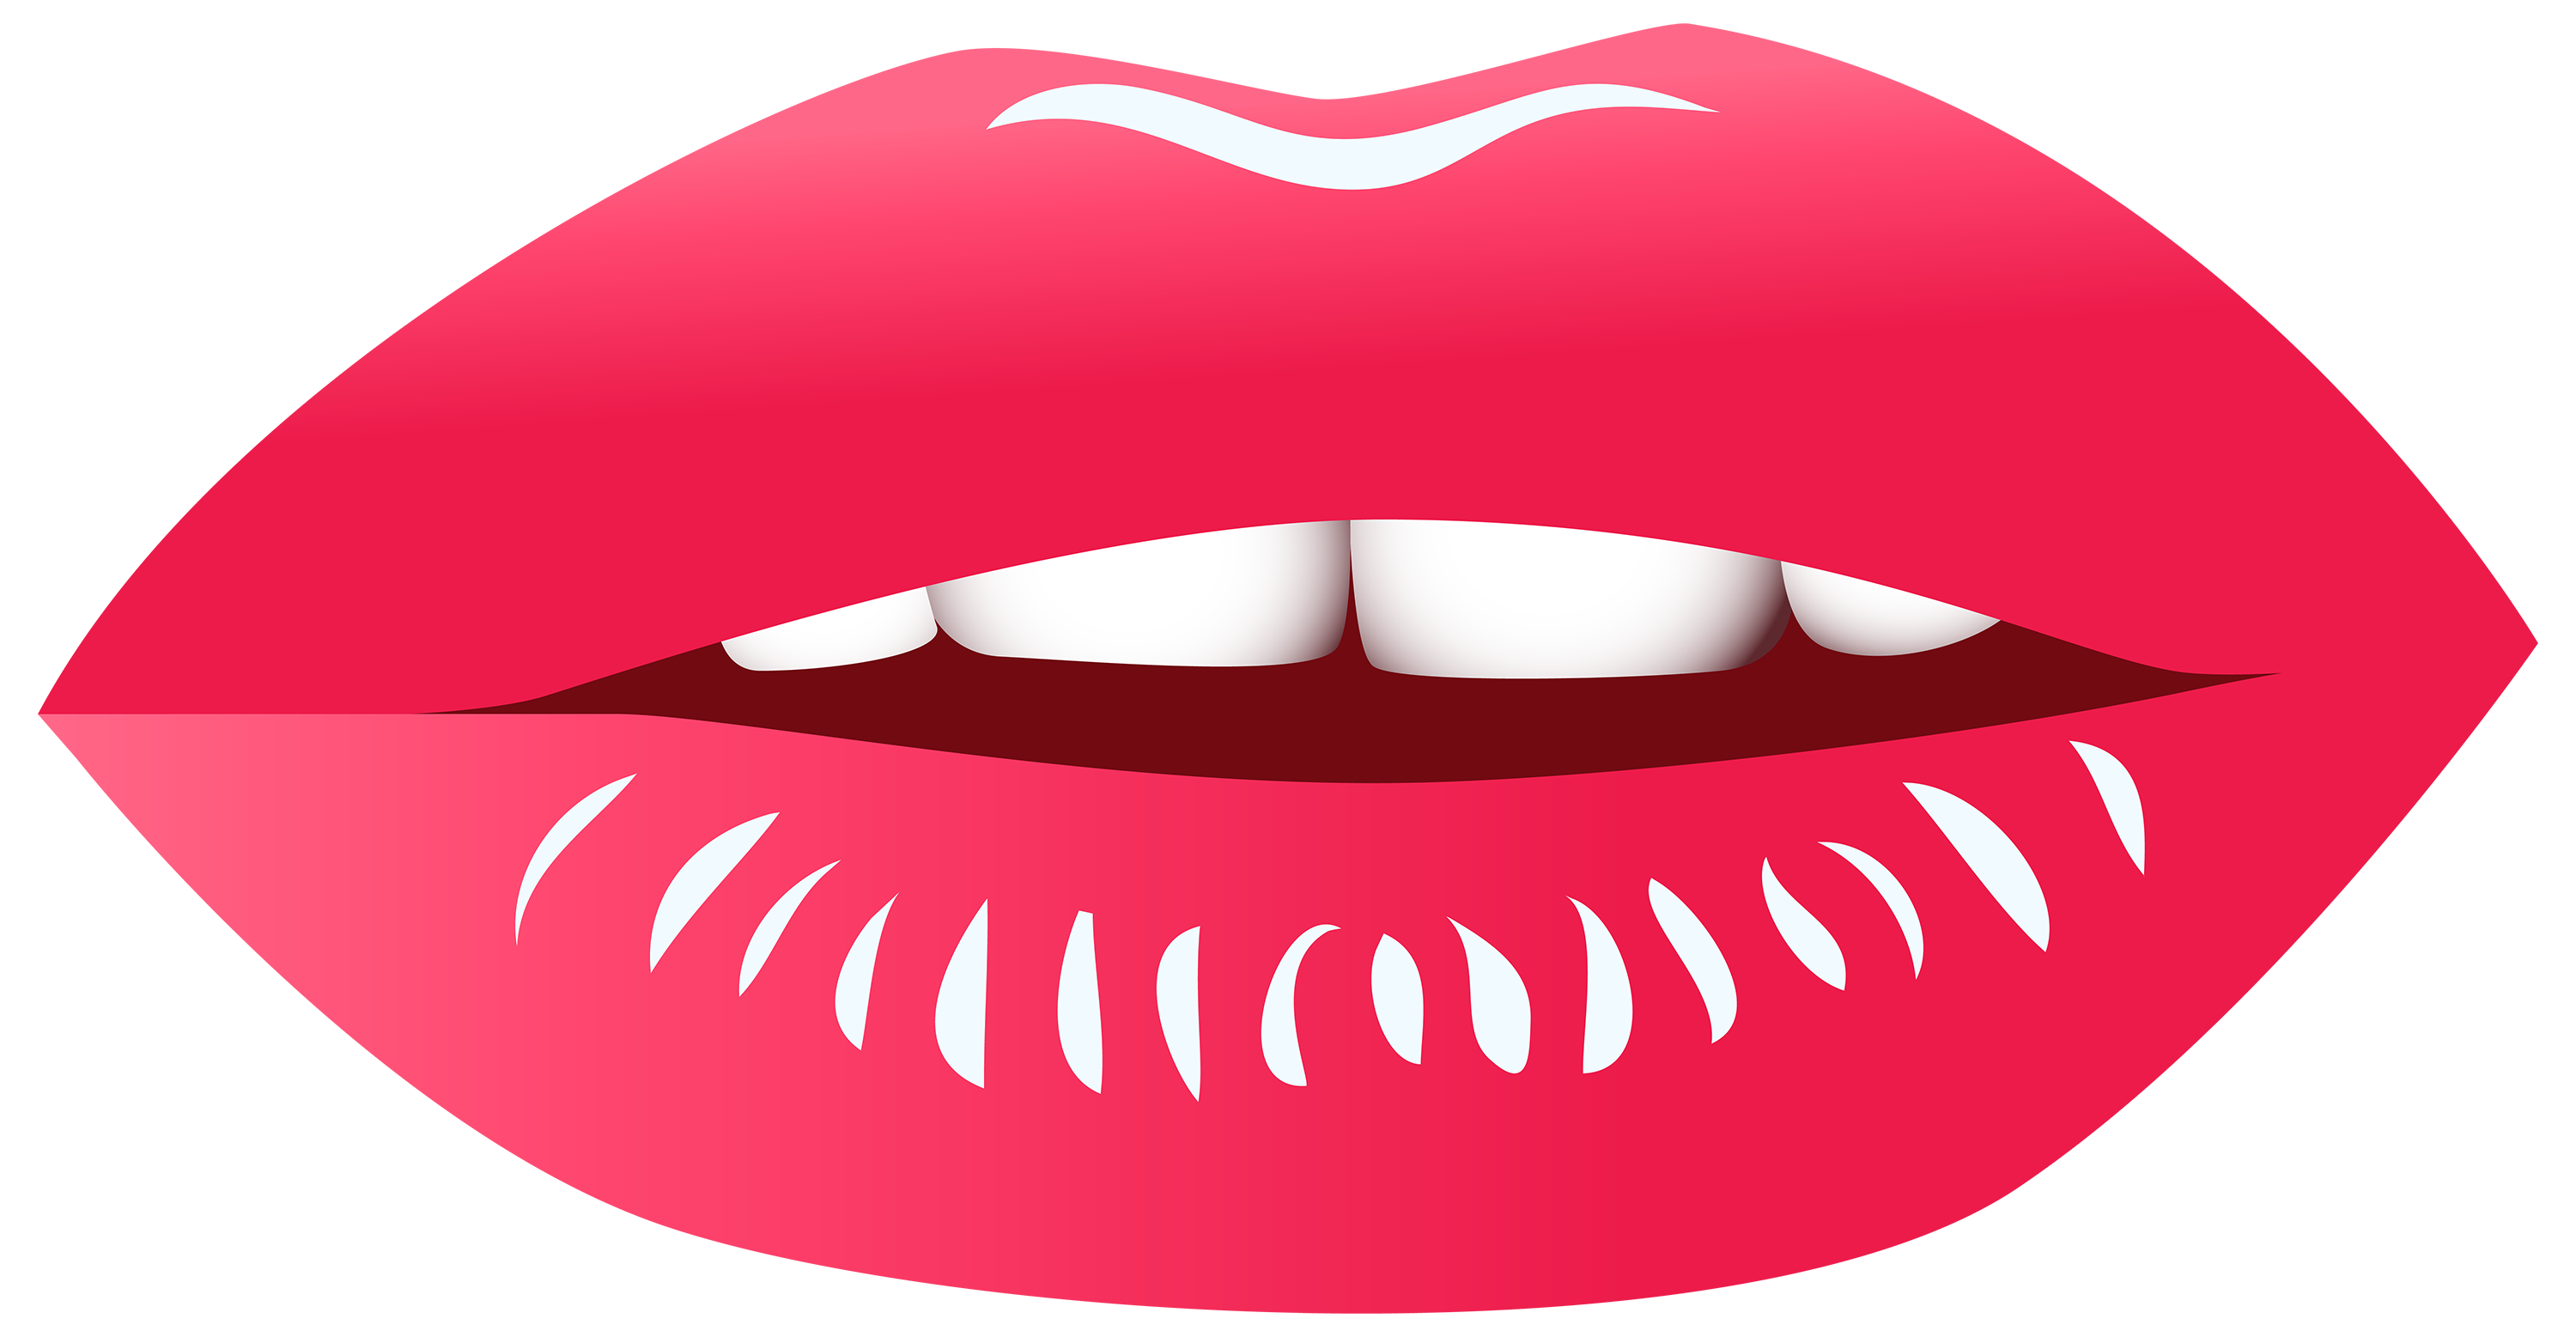 Clip Arts Related To : Lip Drawing Clip art - pink lips png download - 1767...